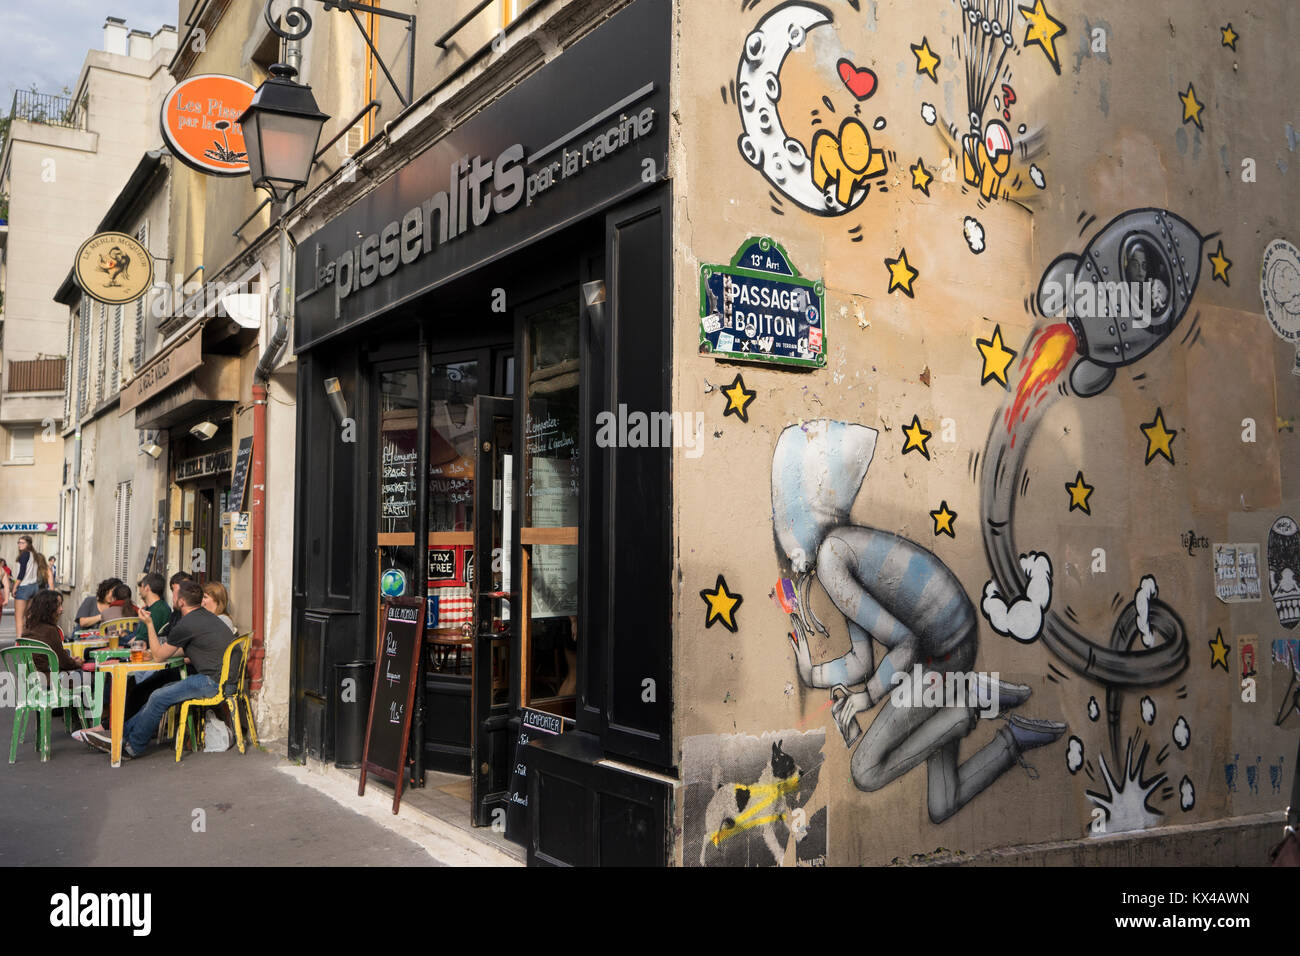 Art work on way of a cafe, Butte aux Cailles, Paris, France Stock Photo